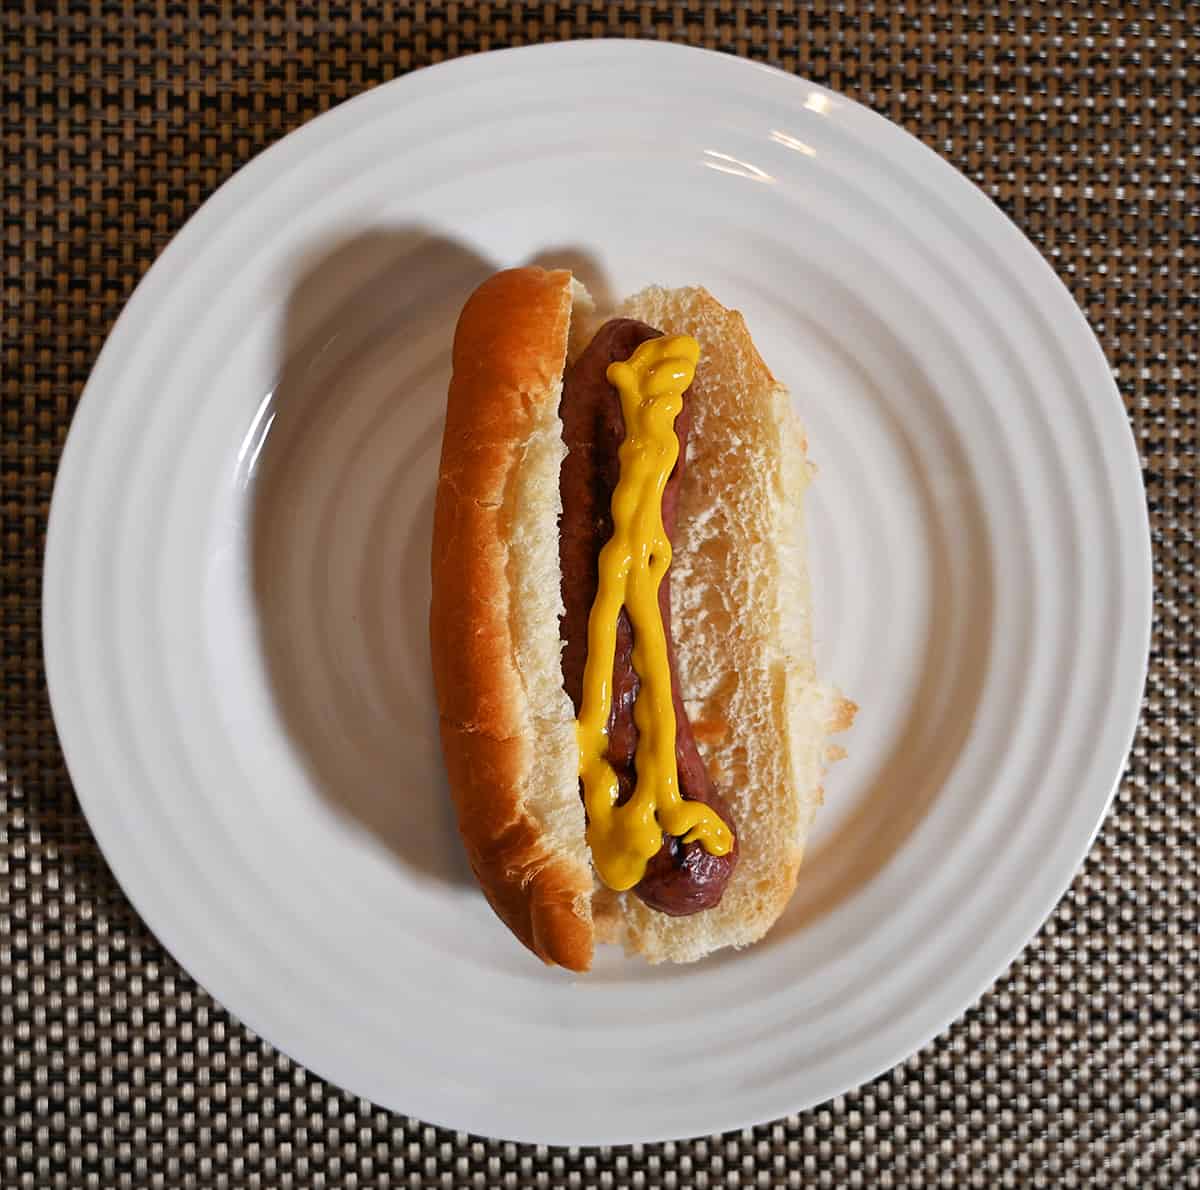 Top down image of a cooked Brat in a bun with a drizzle of mustard on top.